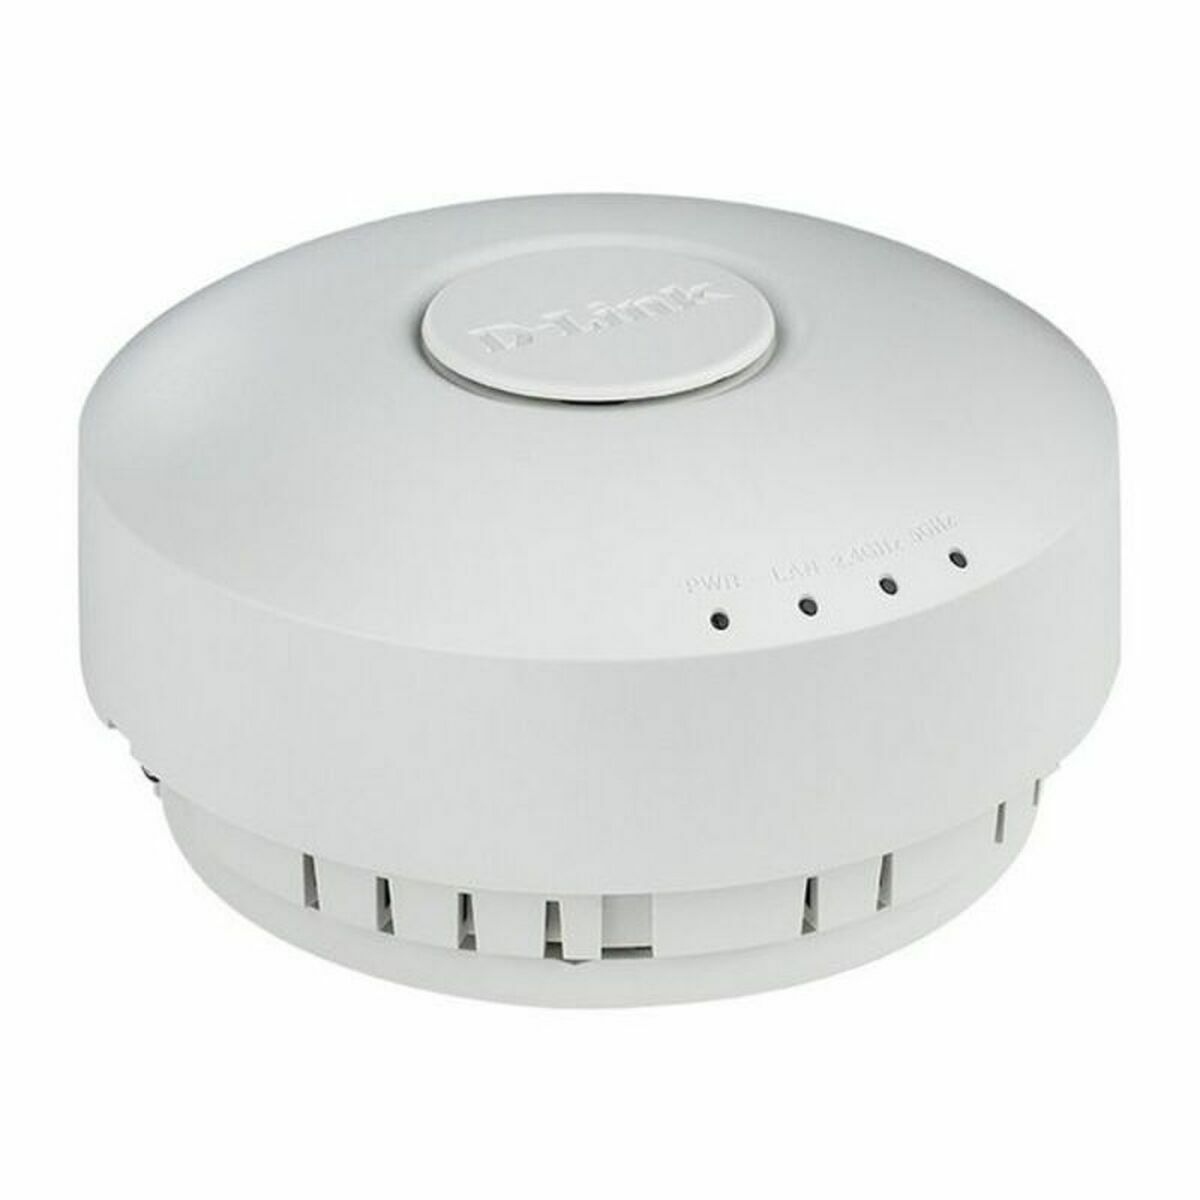 Access point D-Link DWL-6610AP White Black, D-Link, Computing, Network devices, access-point-d-link-dwl-6610ap-white-black, Brand_D-Link, category-reference-2609, category-reference-2803, category-reference-2820, category-reference-t-19685, category-reference-t-19914, category-reference-t-21369, Condition_NEW, networks/wiring, Price_200 - 300, Teleworking, RiotNook